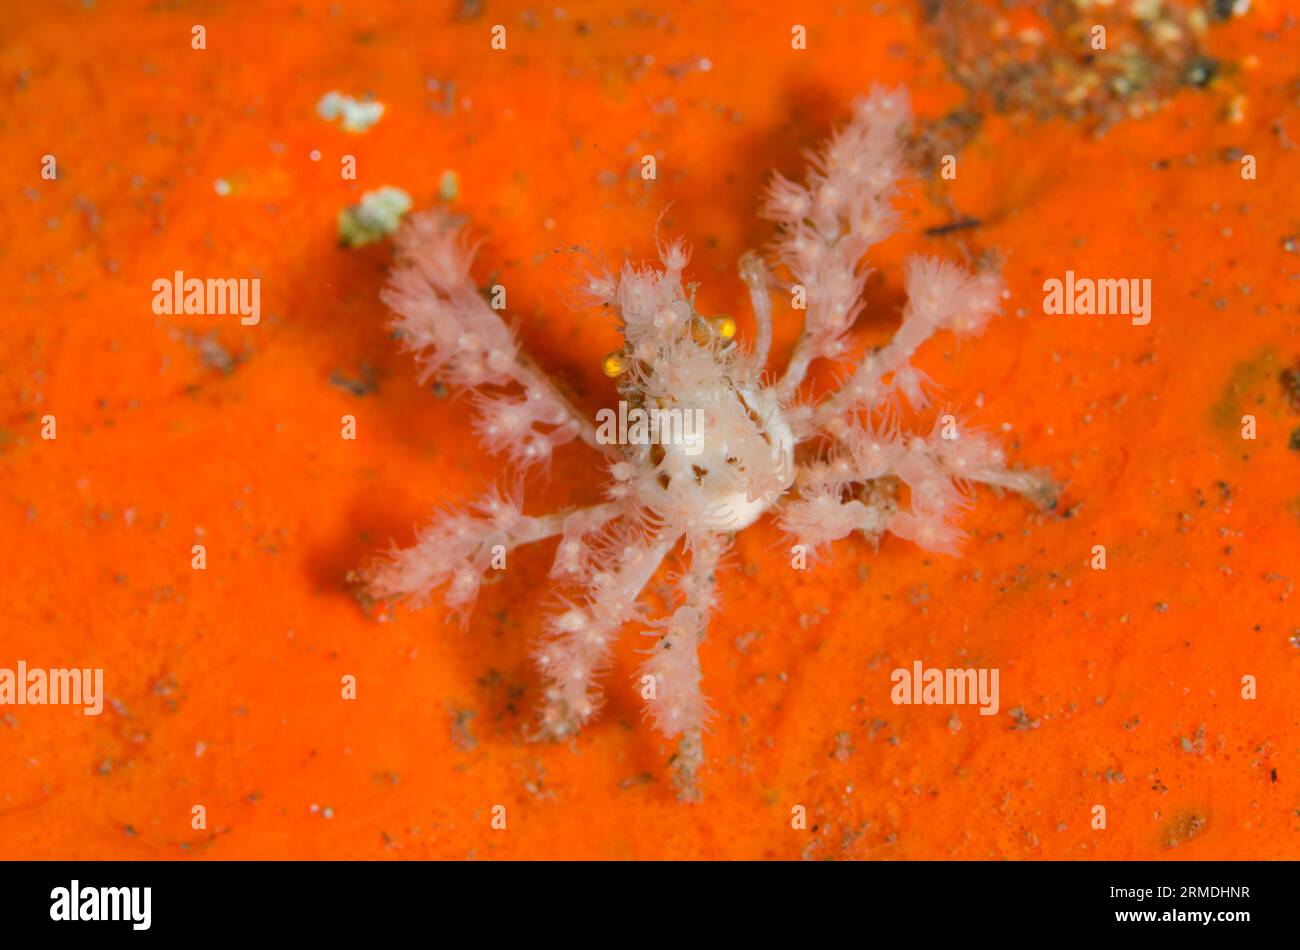 Spider Crab, Achaeus spinosus, carrying small Anemones for protection and camouflage on Sponge, Porifera Phylum, Pong Pong dive site, Seraya, Karangas Stock Photo